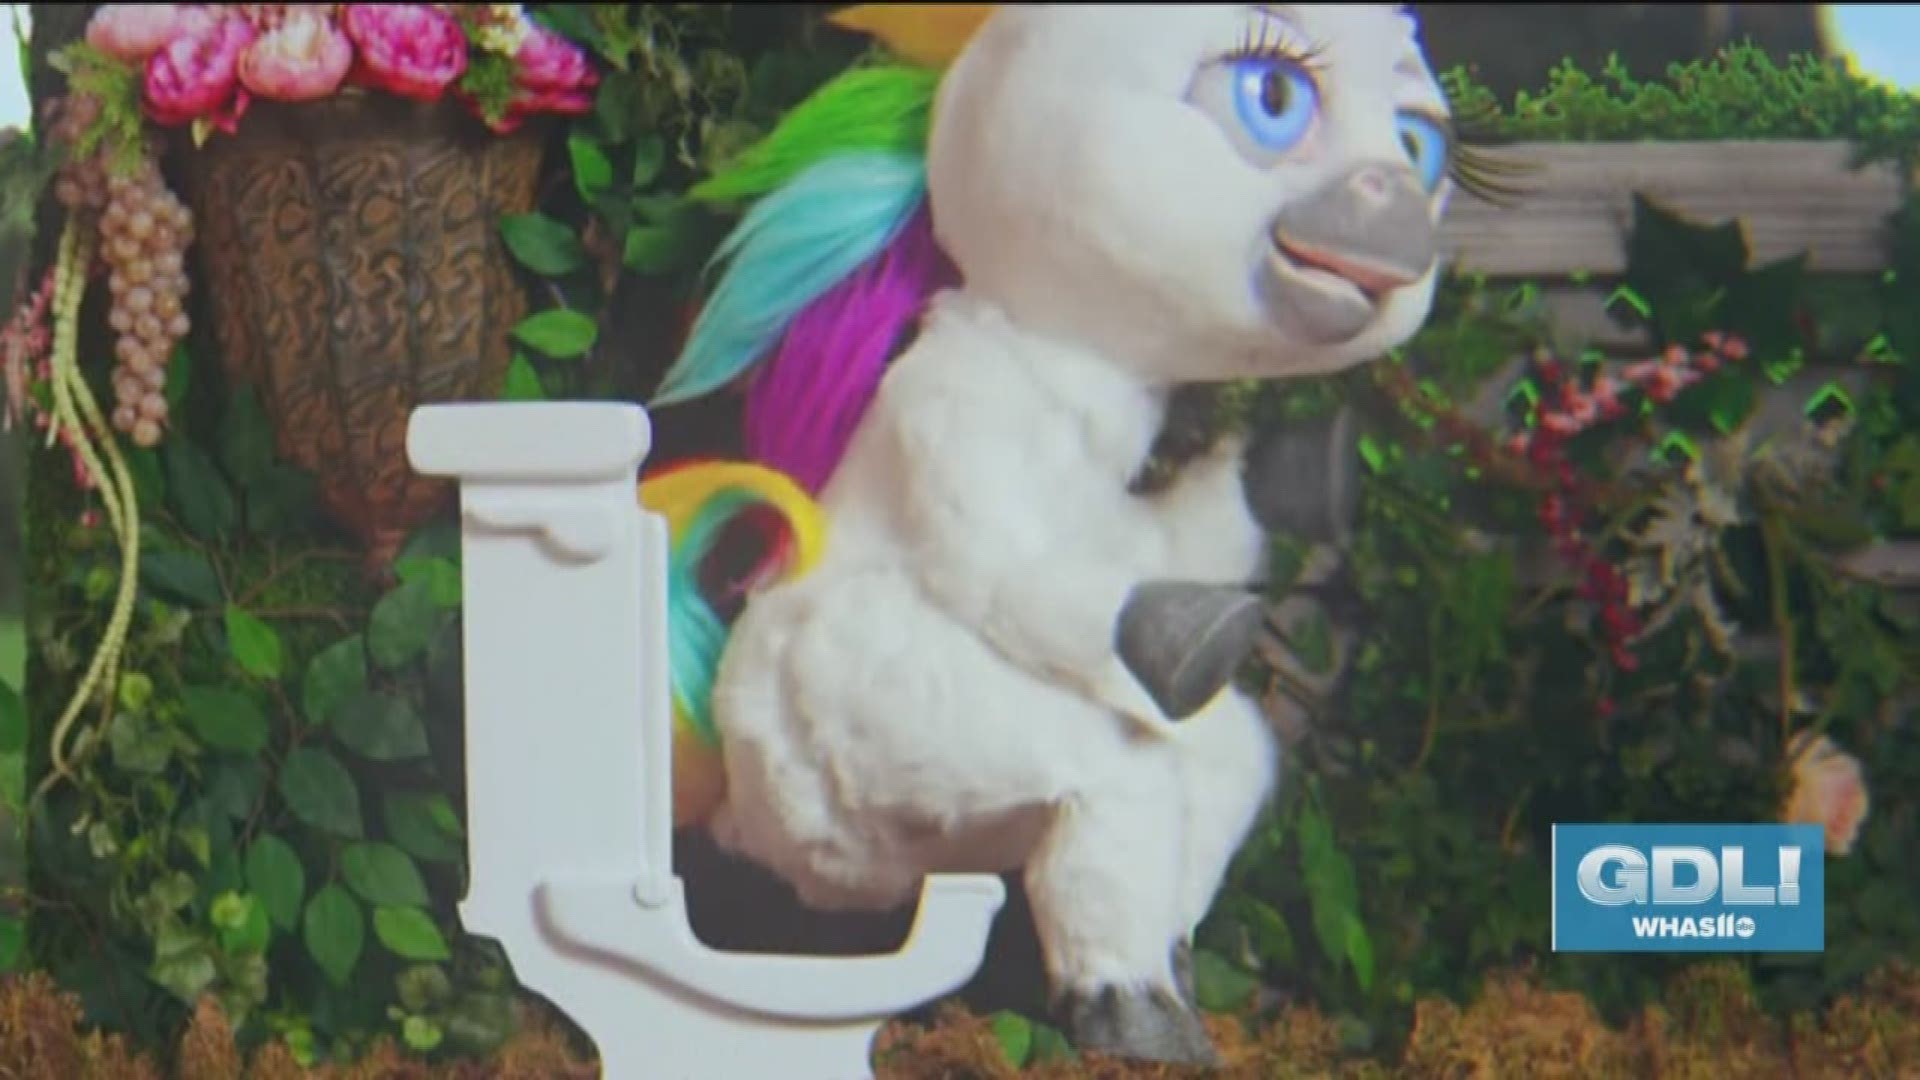 With the help of Squatty Potty, Developer Russie Coy Jones has a new app Potty Brake that helps you find the closest, cleanest restrooms no matter where you are.